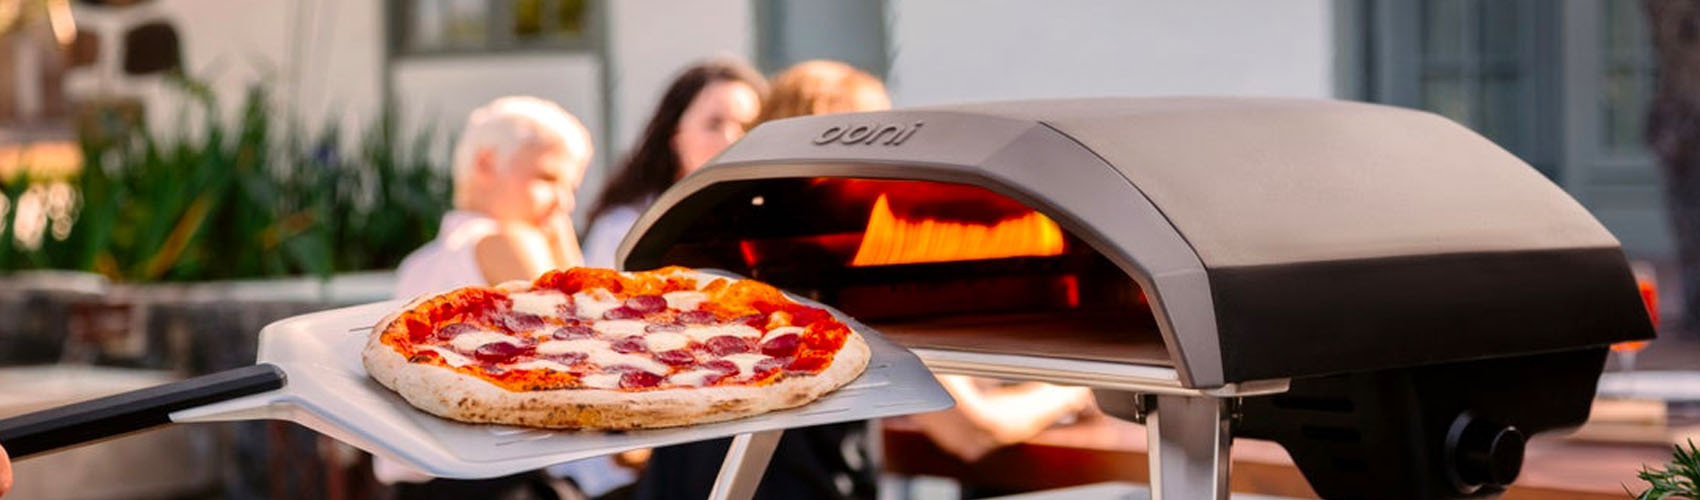 Why you should invest in an Ooni pizza oven 